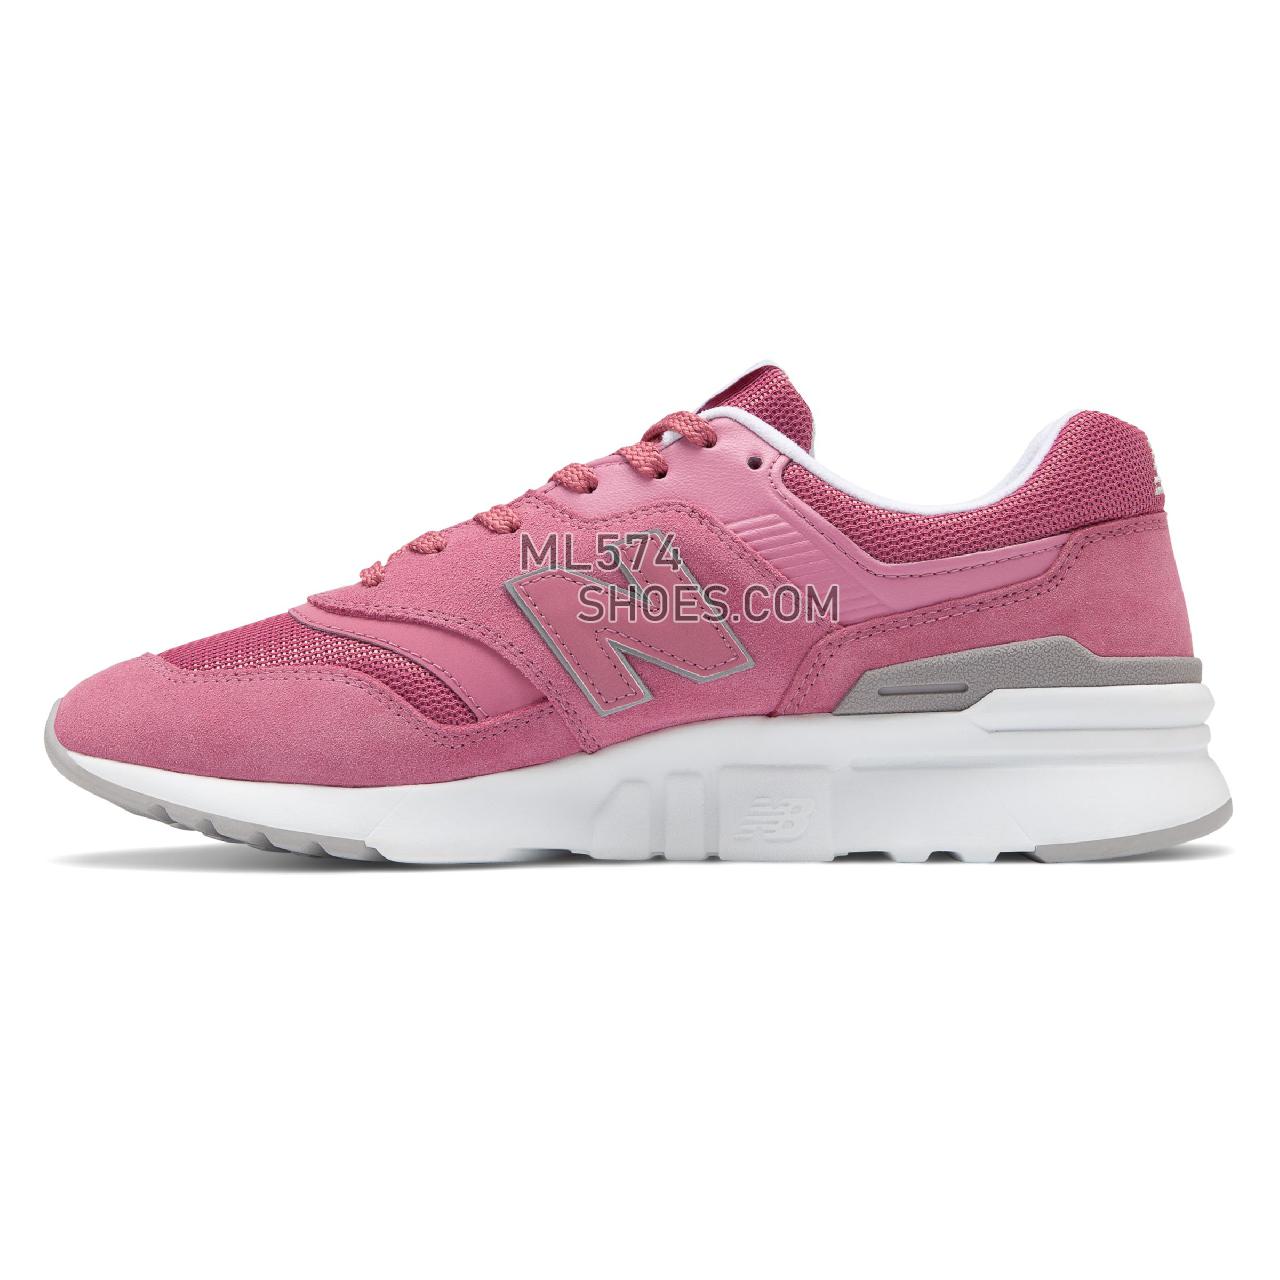 New Balance 997H - Men's Classic Sneakers - Mineral Rose with Light Cyclone - CM997HMA